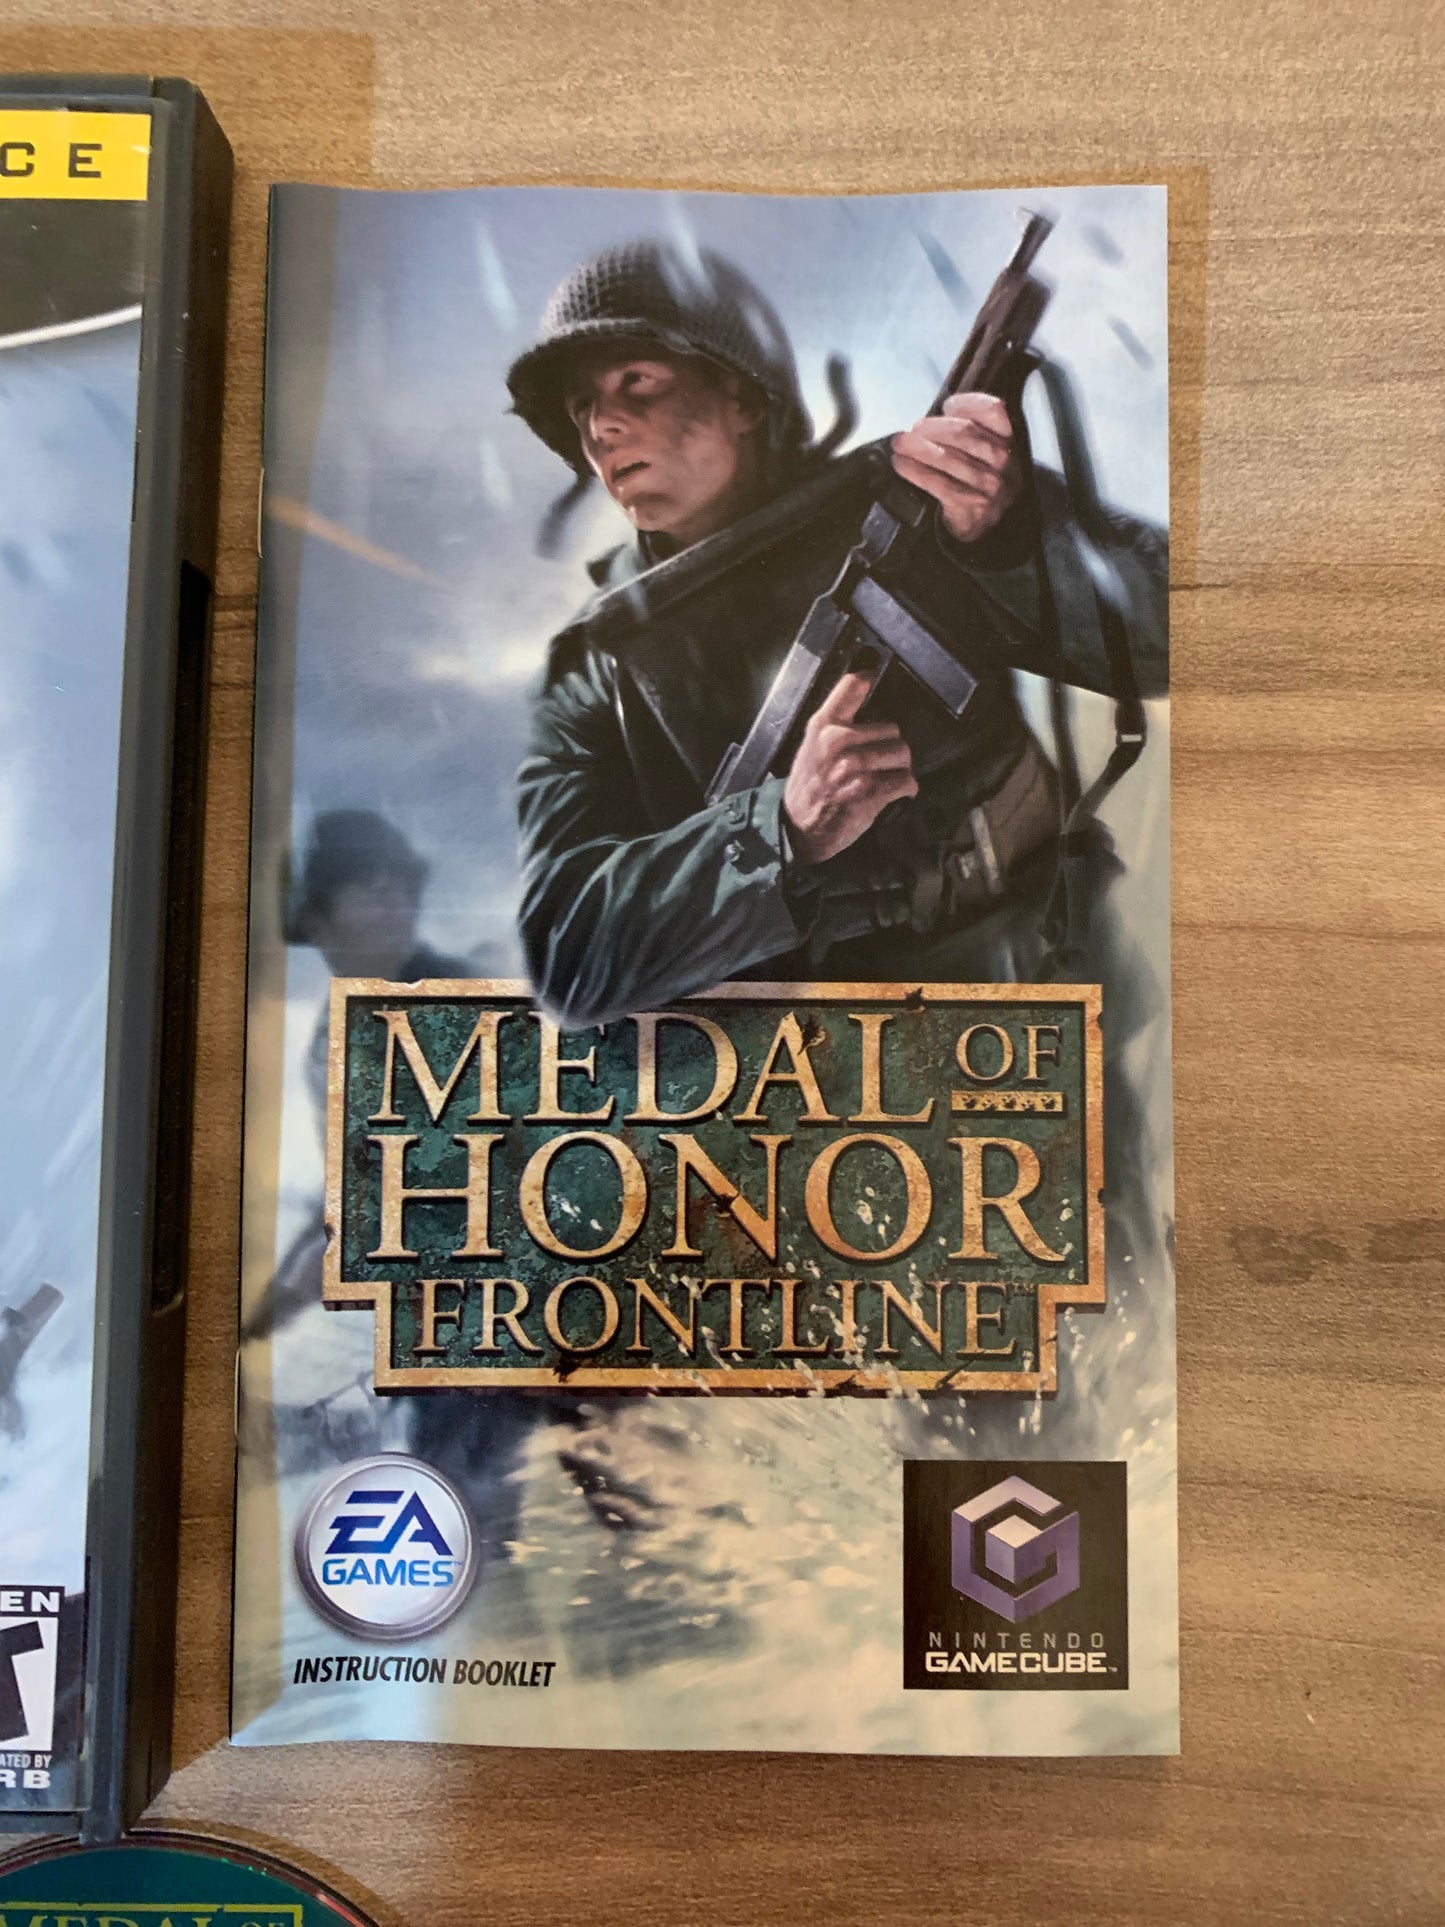 NiNTENDO GAMECUBE [NGC] | MEDAL OF HONOR FRONT Line | PLAYERS CHOiCE